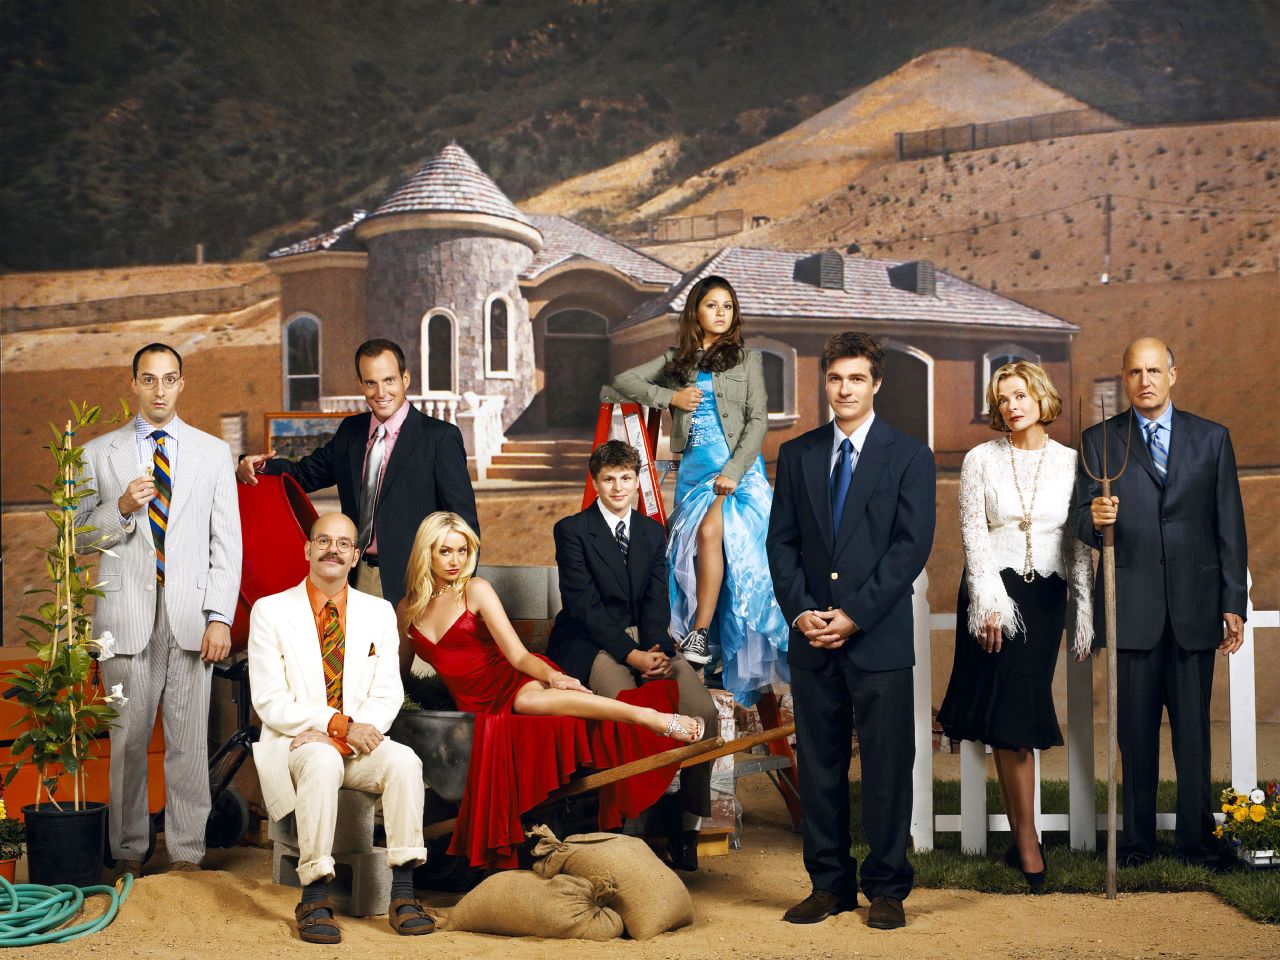 Five seasons in, "Arrested Development" is one of the rare critical darlings that straddles two worlds. It was conceived in the pre-streaming age of the early aughts, where it gained a cult following on Fox, it died, and then it was resurrected in the post-streaming free-for-all we live in today. Seasons four and five were made for the binge-an-entire-season-at-once era, but to truly understand why so many are so obsessed with the awkwardly hilarious Bluth family, you'll have to digest seasons 1-3. <strong>Where to watch: </strong>Netflix 